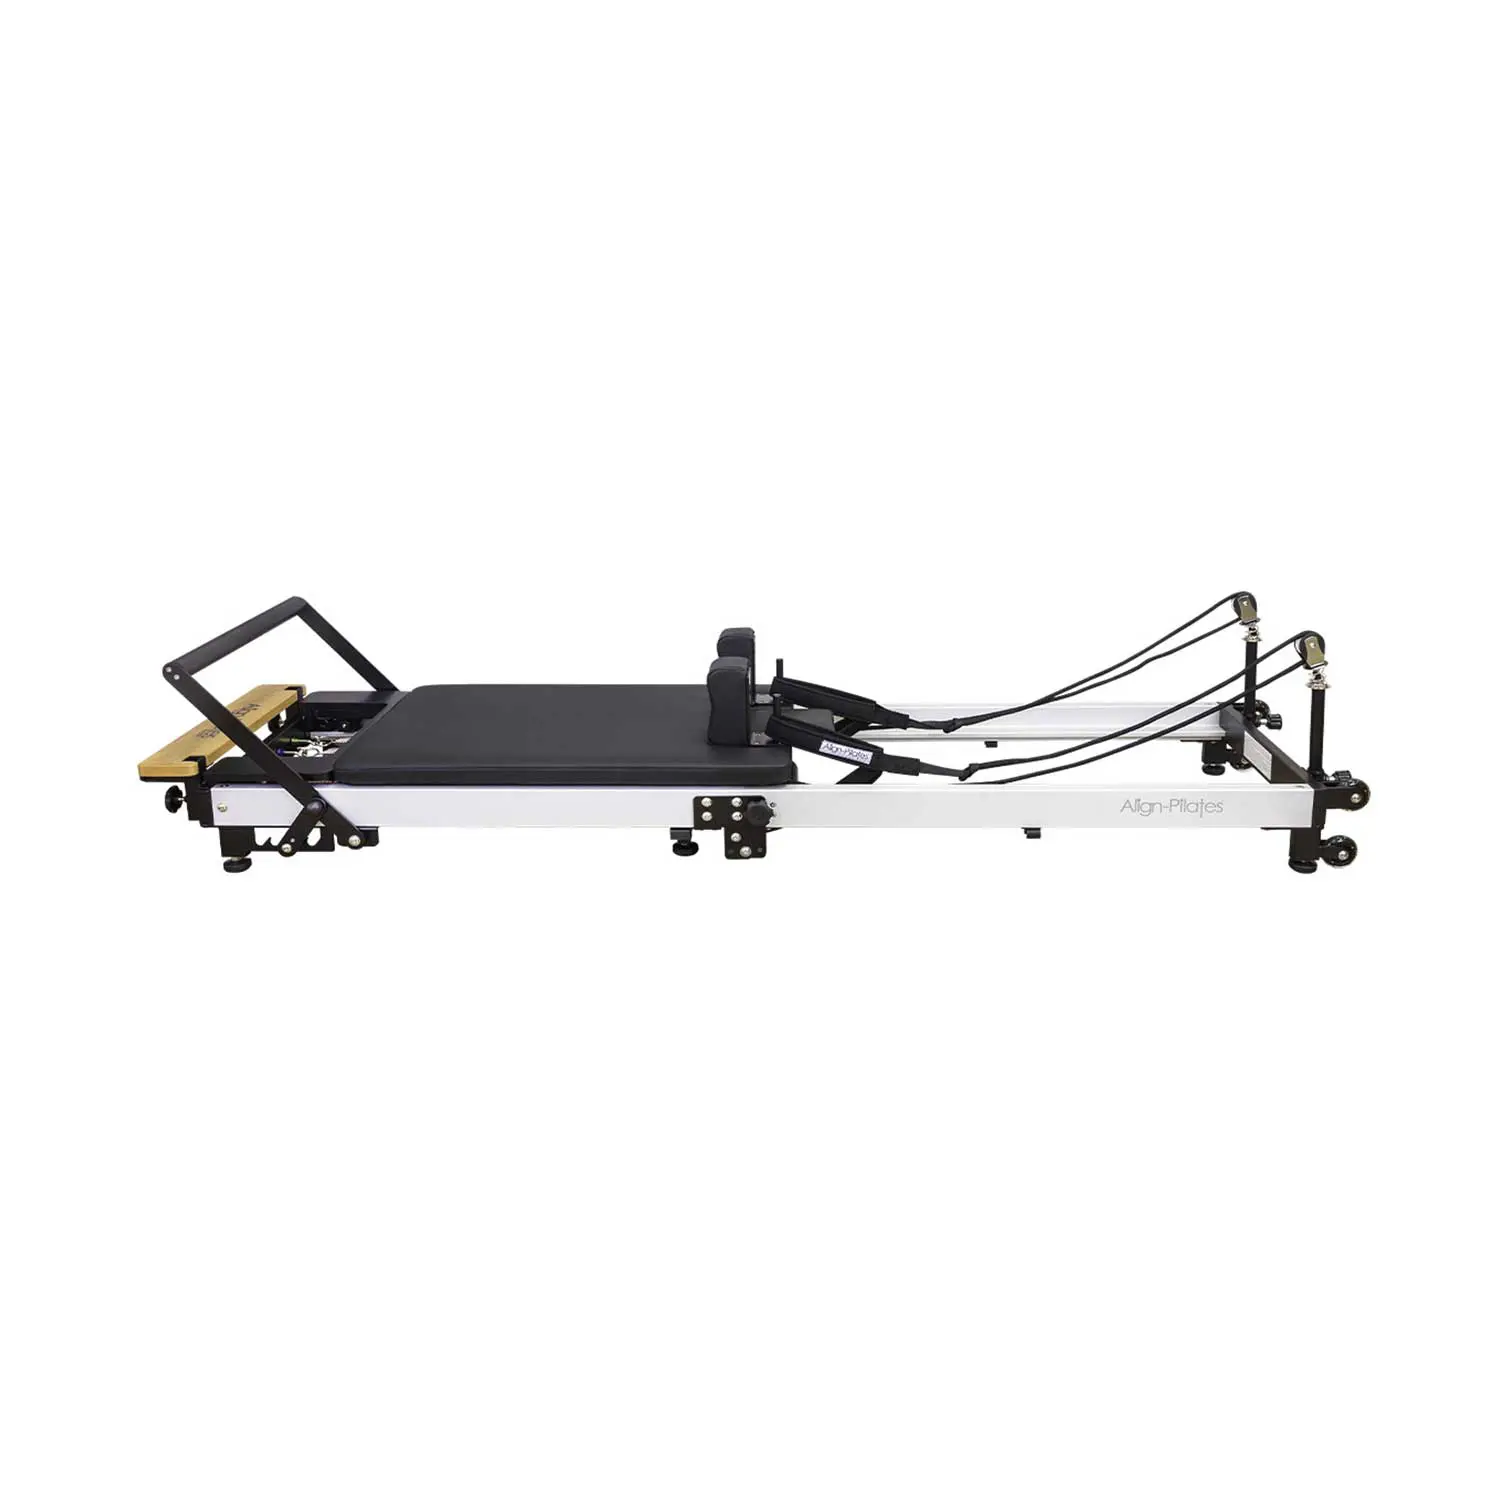 F3 Folding Pilates Reformer on Sale at Gym Marine Yachts and Interiors